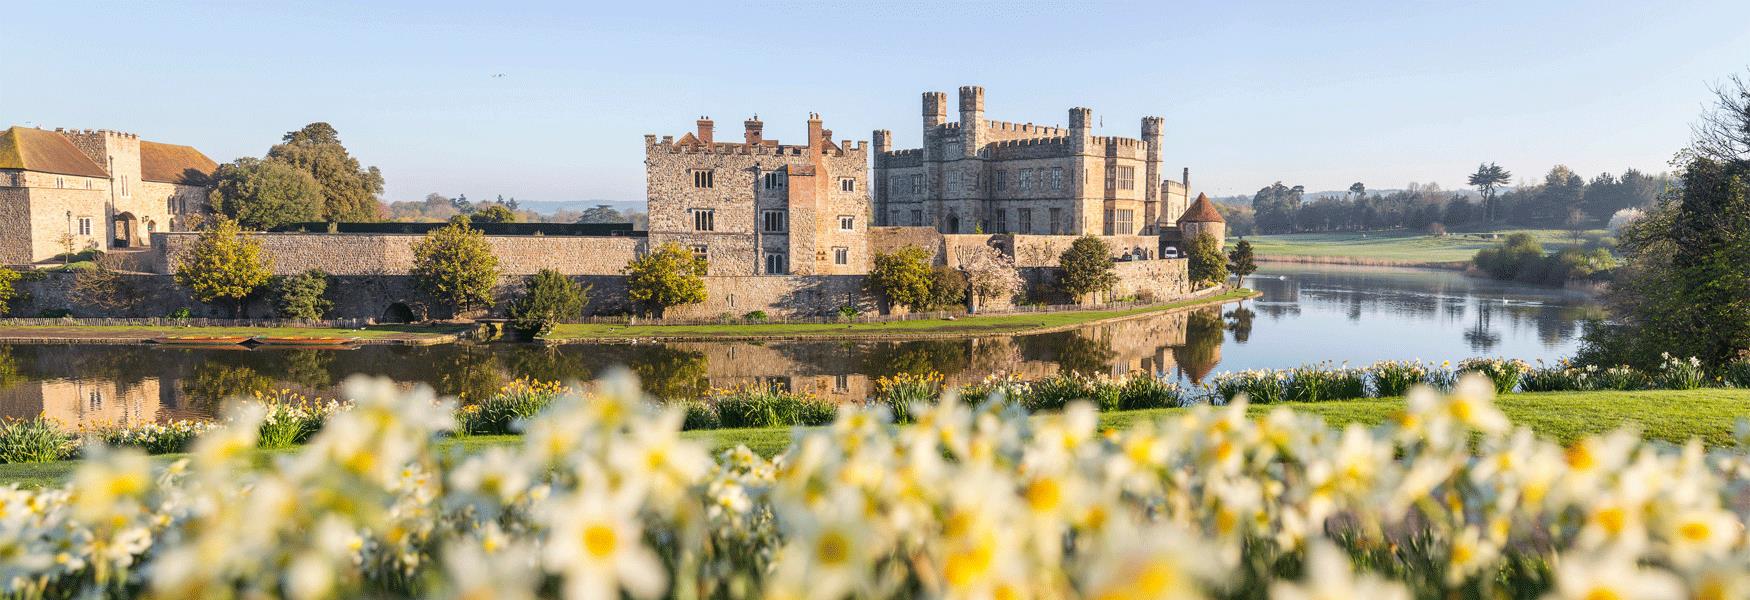 A glorious display of daffodils at Leeds Castle in early spring.  This is a great time to walk through the gardens enjoying the bulbs.